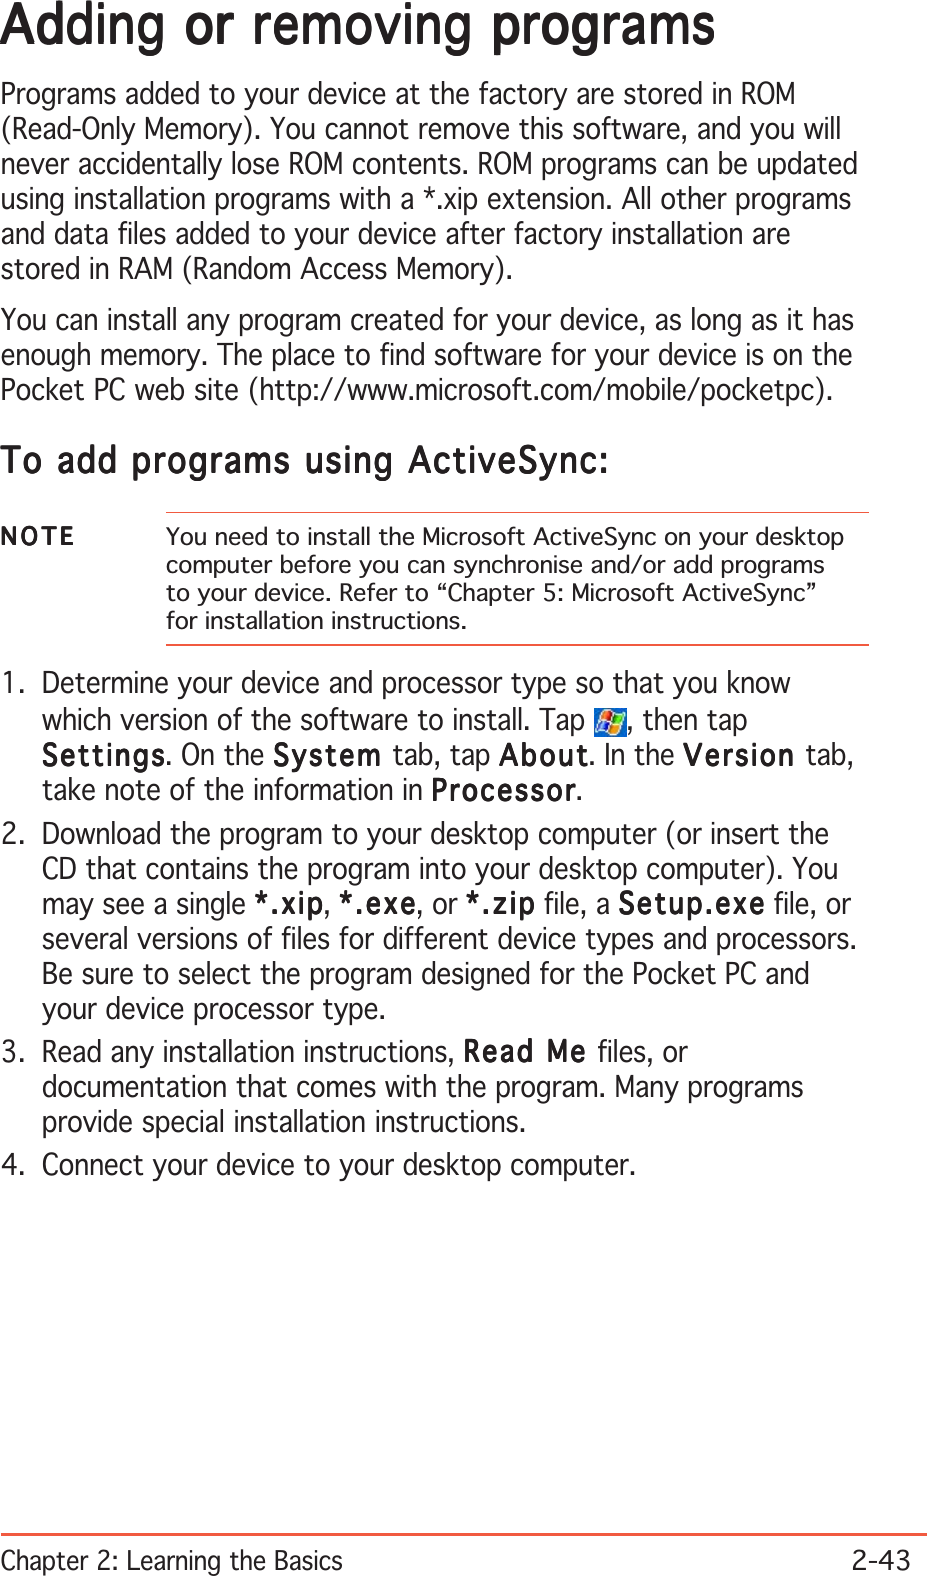 Chapter 2: Learning the Basics2-43Adding or removing programsAdding or removing programsAdding or removing programsAdding or removing programsAdding or removing programsPrograms added to your device at the factory are stored in ROM(Read-Only Memory). You cannot remove this software, and you willnever accidentally lose ROM contents. ROM programs can be updatedusing installation programs with a *.xip extension. All other programsand data files added to your device after factory installation arestored in RAM (Random Access Memory).You can install any program created for your device, as long as it hasenough memory. The place to find software for your device is on thePocket PC web site (http://www.microsoft.com/mobile/pocketpc).To add programs using ActiveSync:To add programs using ActiveSync:To add programs using ActiveSync:To add programs using ActiveSync:To add programs using ActiveSync:NOTENOTENOTENOTEN O T E You need to install the Microsoft ActiveSync on your desktopcomputer before you can synchronise and/or add programsto your device. Refer to “Chapter 5: Microsoft ActiveSync”for installation instructions.1. Determine your device and processor type so that you knowwhich version of the software to install. Tap  , then tapSettingsSettingsSettingsSettingsSettings. On the SystemSystemSystemSystemSystem tab, tap AboutAboutAboutAboutAbout. In the VersionVersionVersionVersionVersion tab,take note of the information in ProcessorProcessorProcessorProcessorProcessor.2. Download the program to your desktop computer (or insert theCD that contains the program into your desktop computer). Youmay see a single *.xip*.xip*.xip*.xip*.xip, *.exe*.exe*.exe*.exe*.exe, or *.zip*.zip*.zip*.zip*. z ip file, a Setup.exeSetup.exeSetup.exeSetup.exeSetup.exe file, orseveral versions of files for different device types and processors.Be sure to select the program designed for the Pocket PC andyour device processor type.3. Read any installation instructions, Read Me Read Me Read Me Read Me Read Me files, ordocumentation that comes with the program. Many programsprovide special installation instructions.4. Connect your device to your desktop computer.